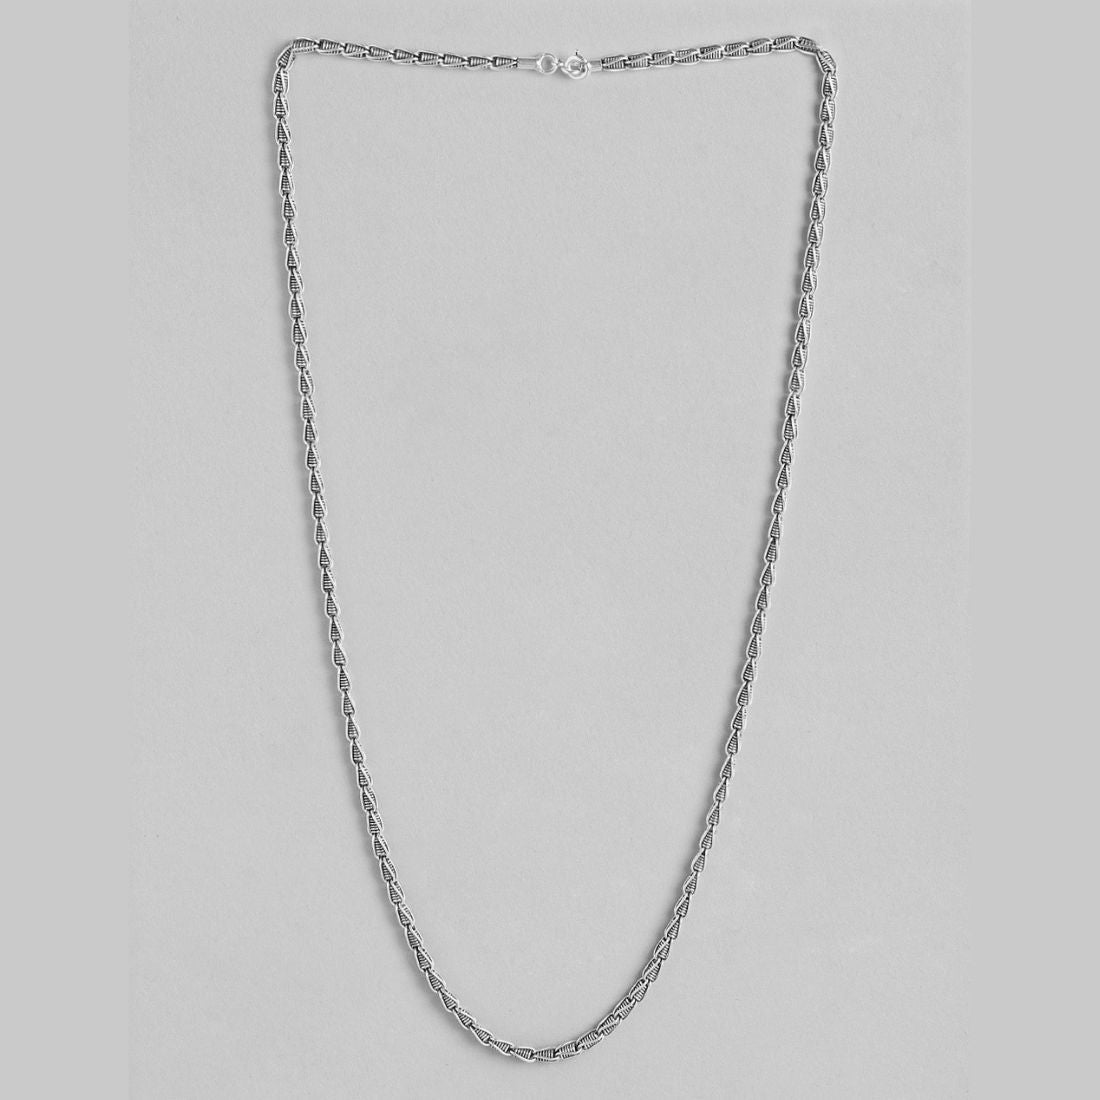 Majestic Rope 925 Sterling Silver Rhodium-Plated Men's Chain